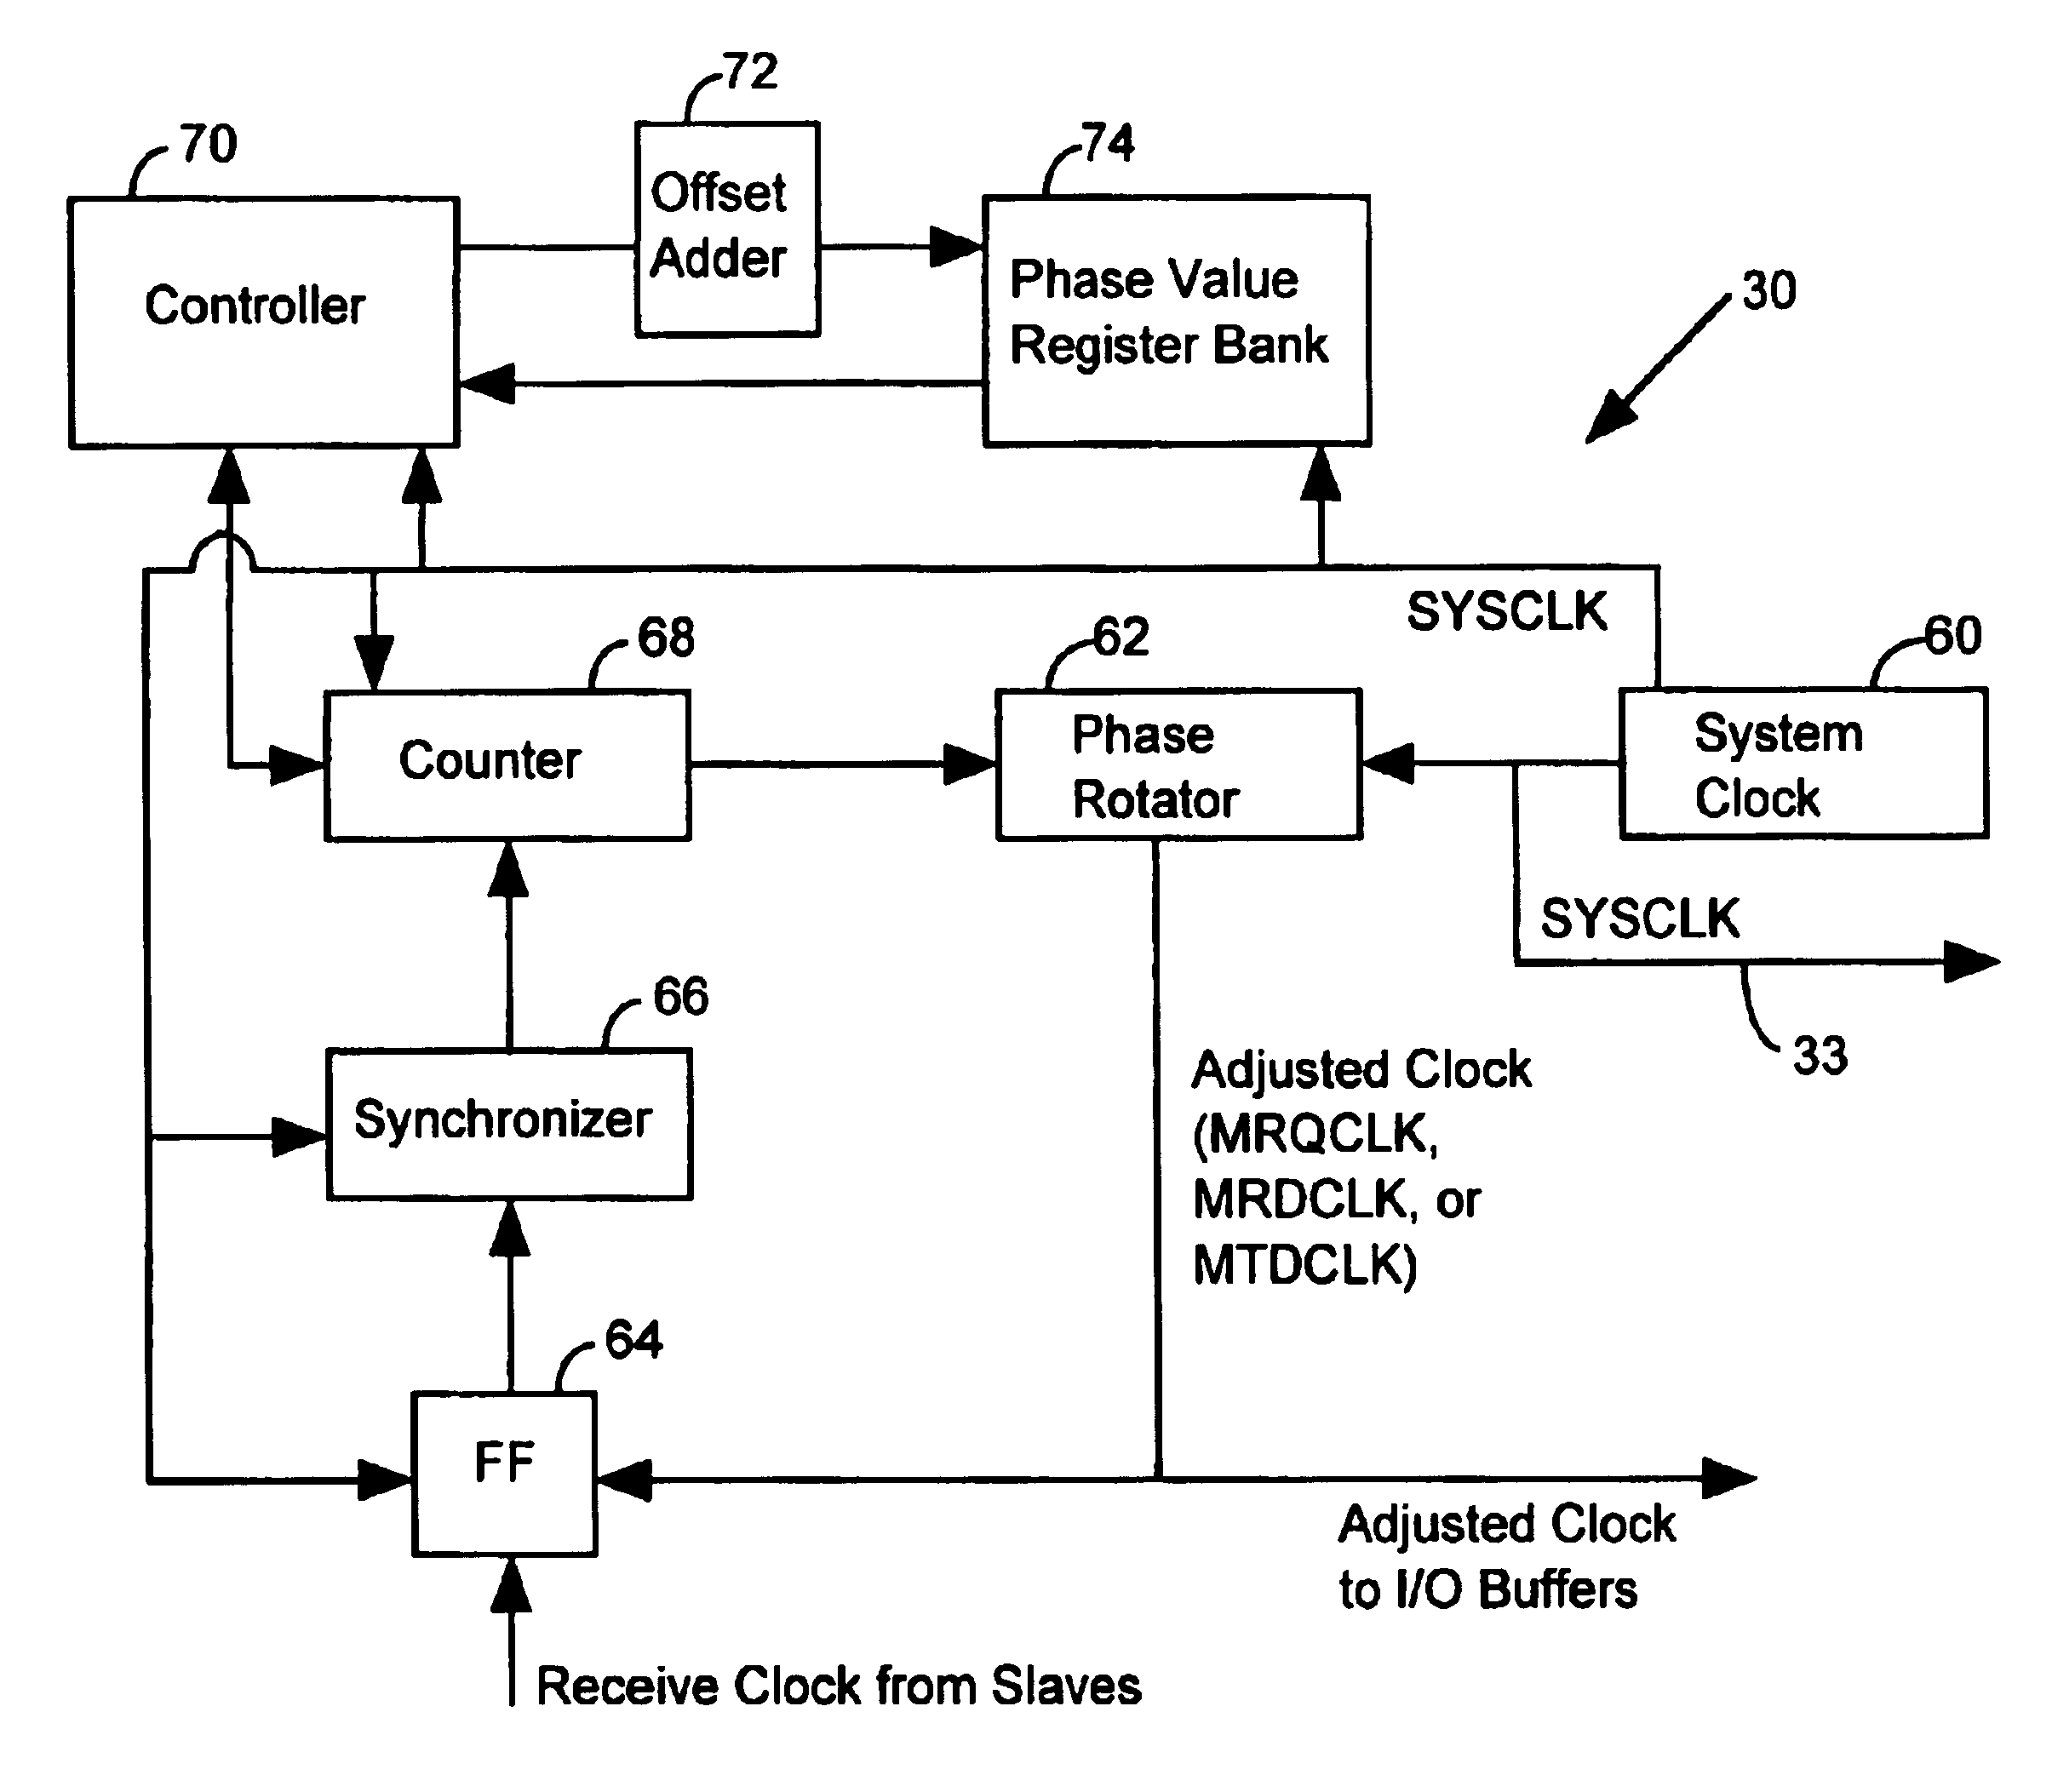 Apparatus and method for controlling a master/slave system via master device synchronization